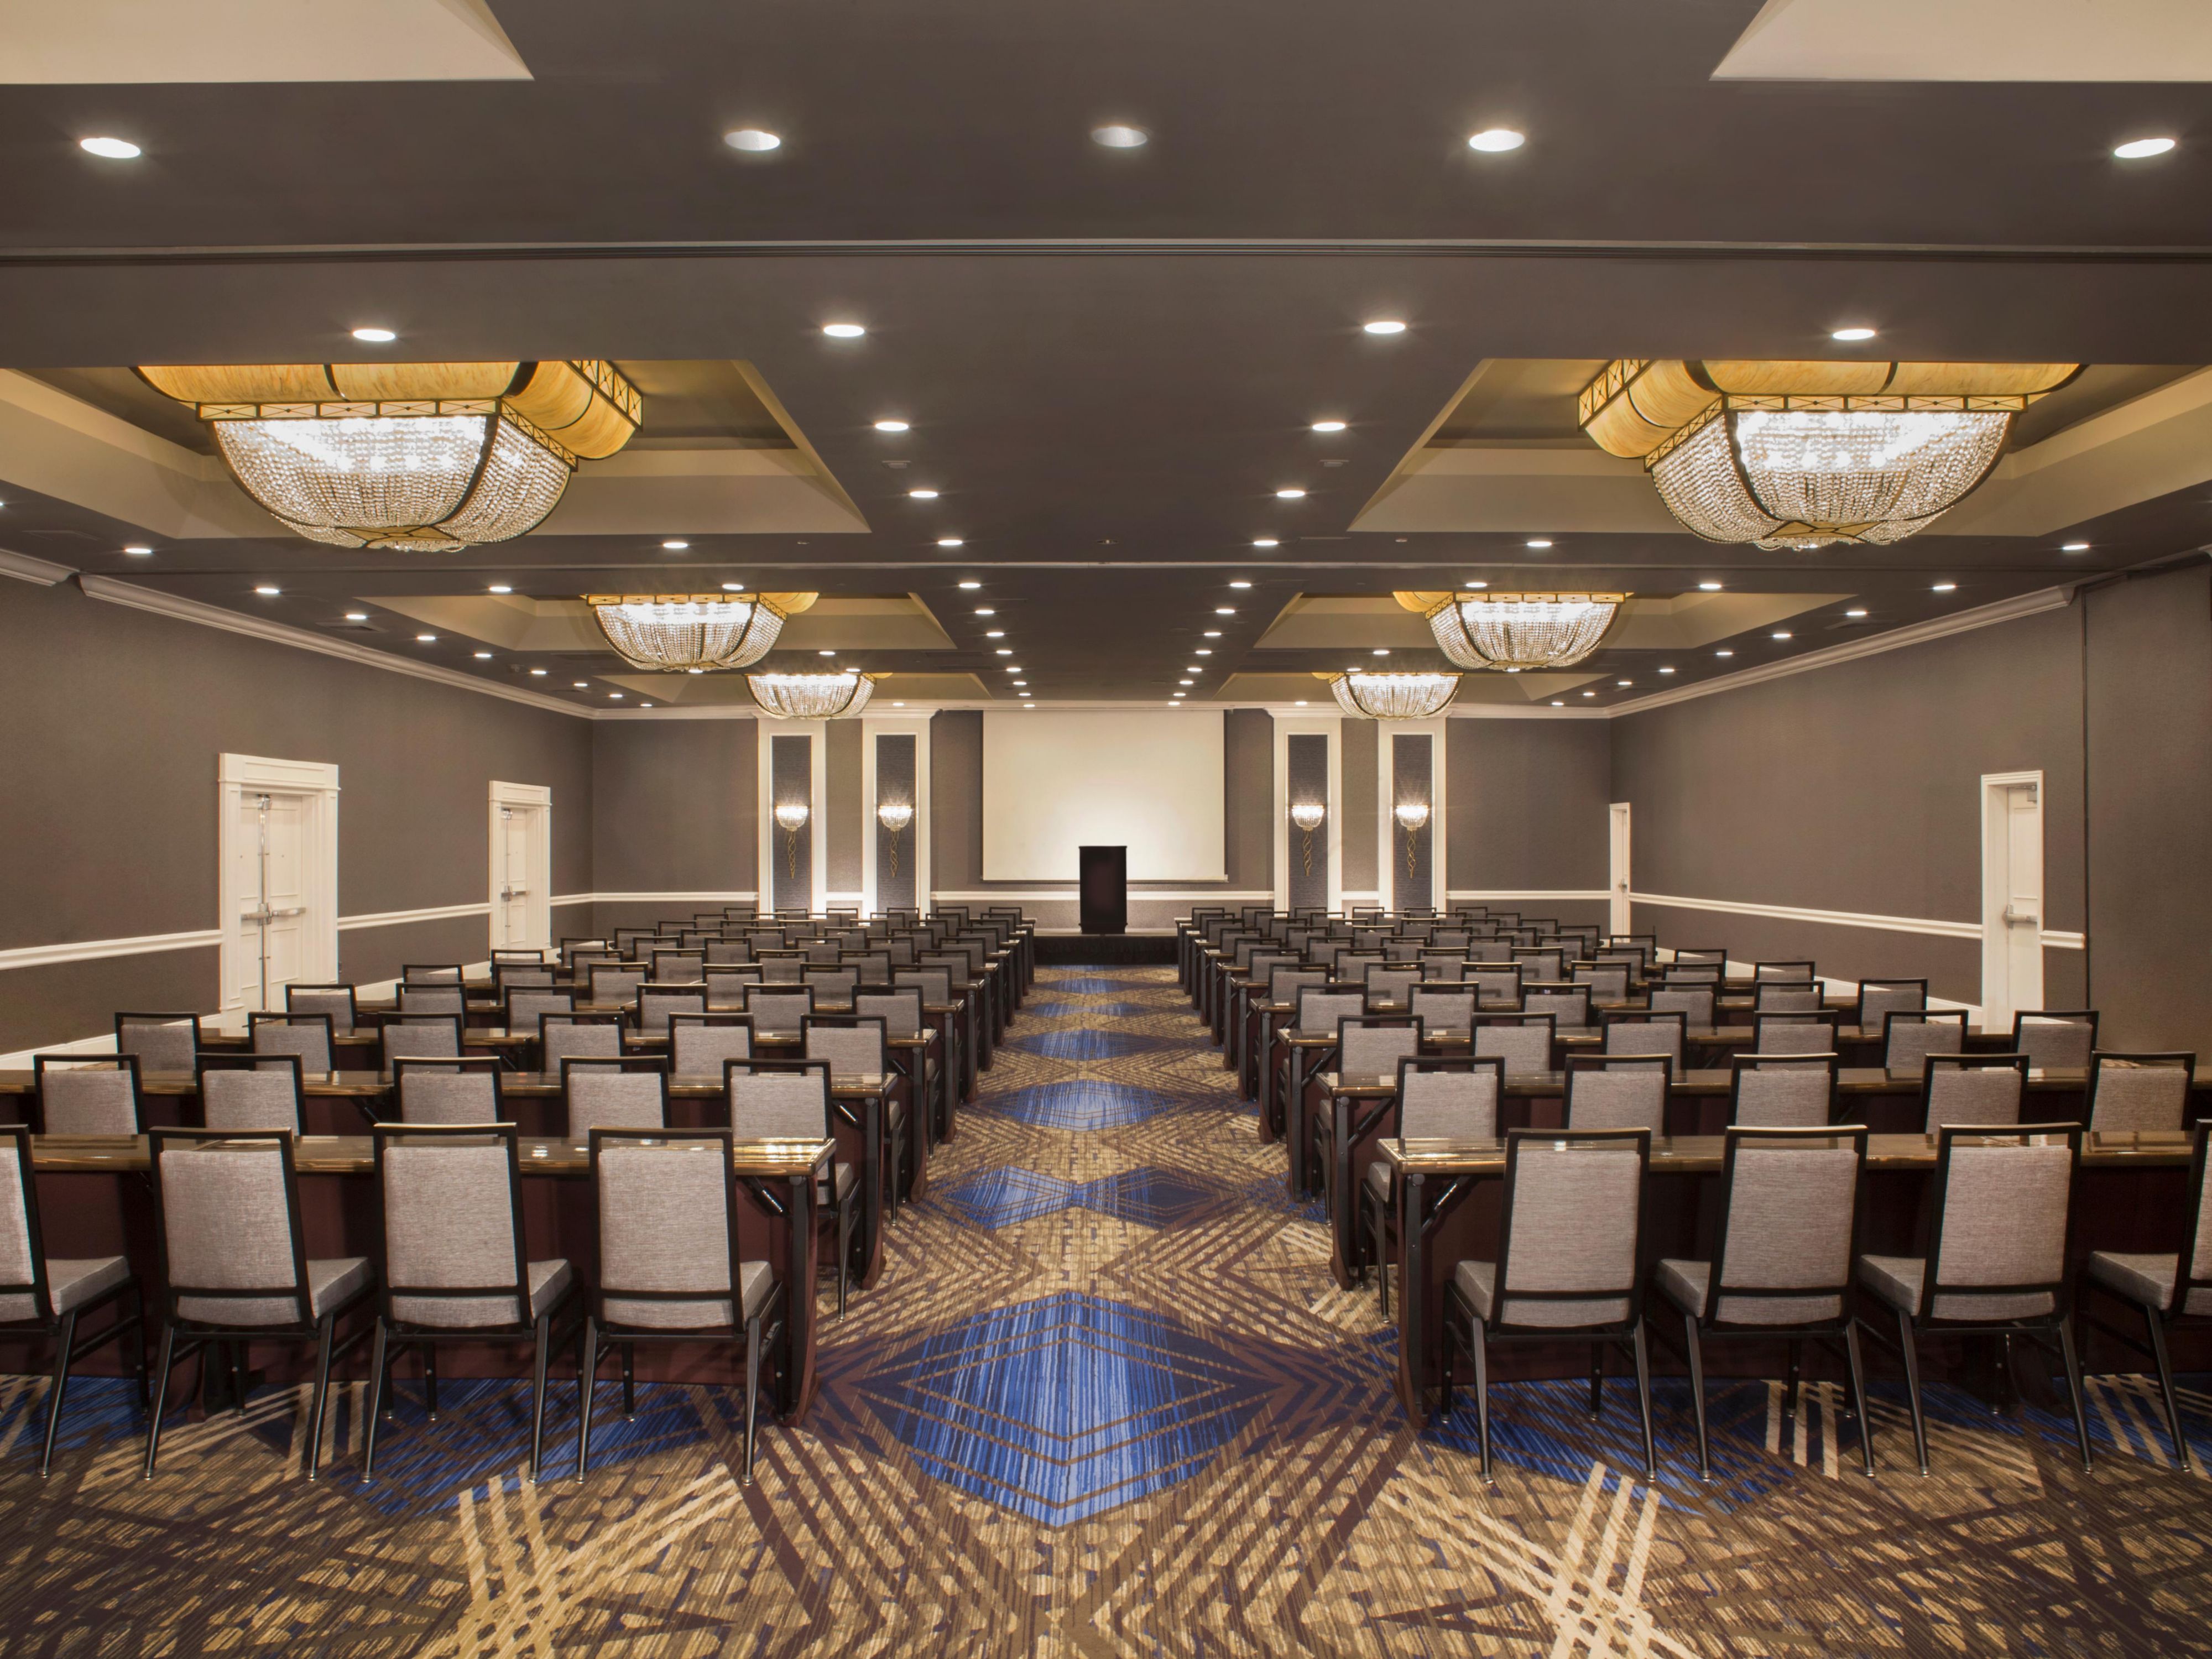 Book your next meeting or event with us in Annapolis and enjoy any one of our beautifully decorated and flexible function spaces! Enjoy a location conveniently located near Baltimore to accommodate guests near and far. Simplify planning your next function and let us take care of the details. 